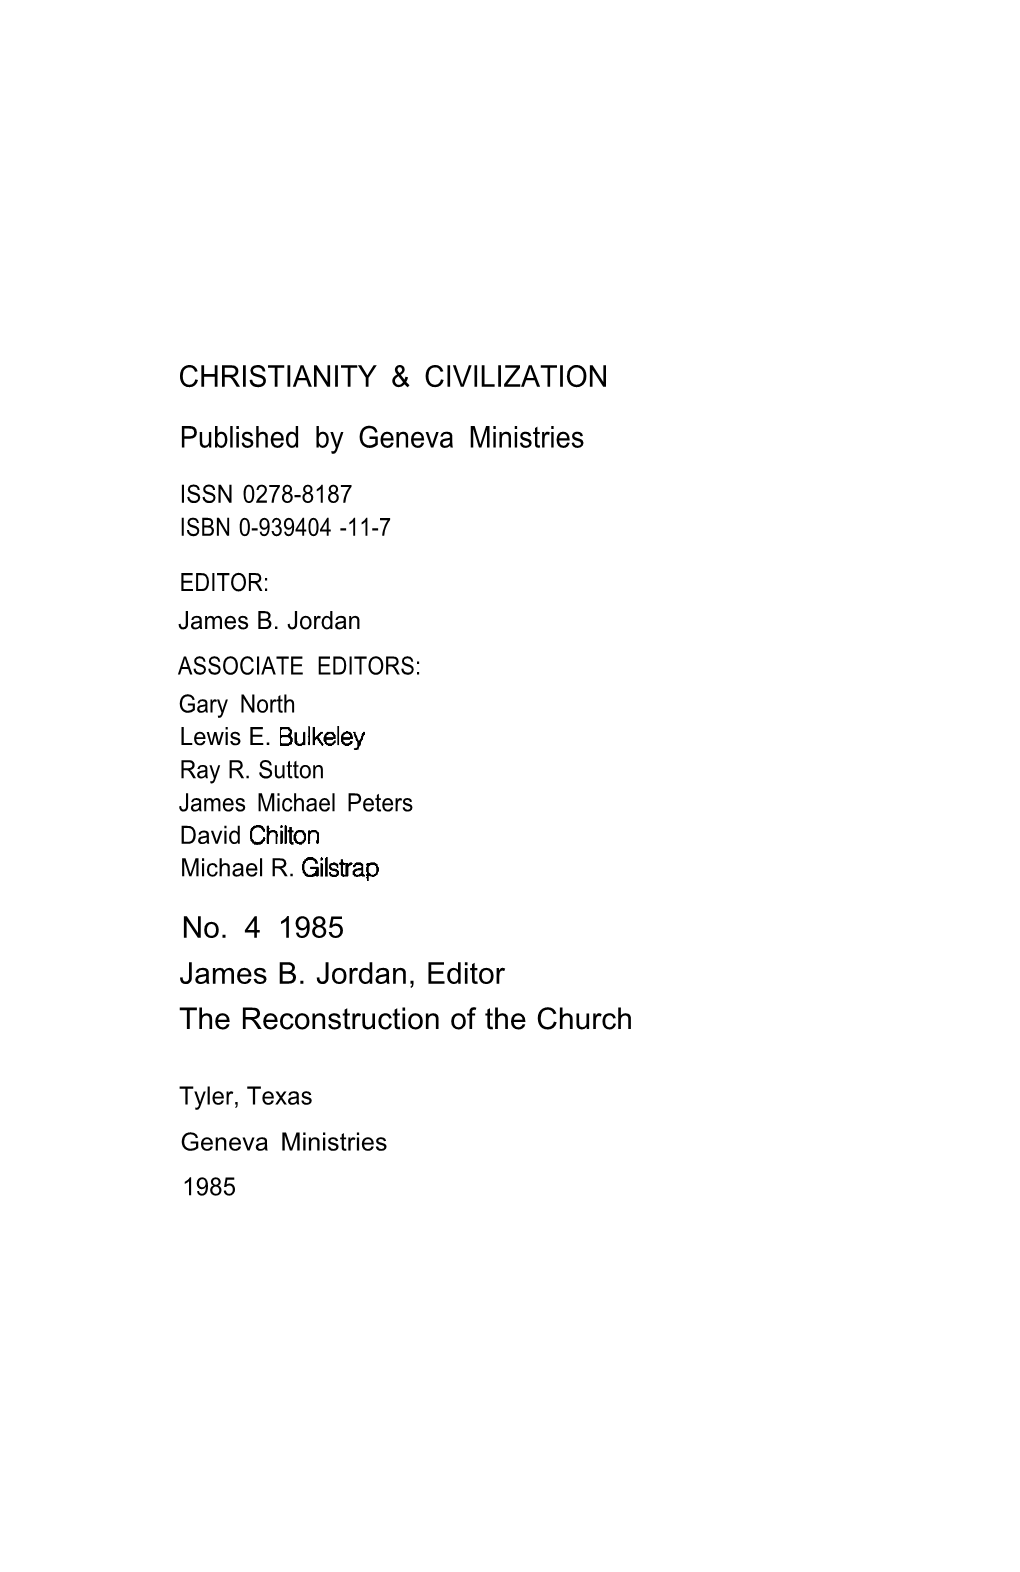 The Reconstruction of the Church: Christianity & Civilization #4